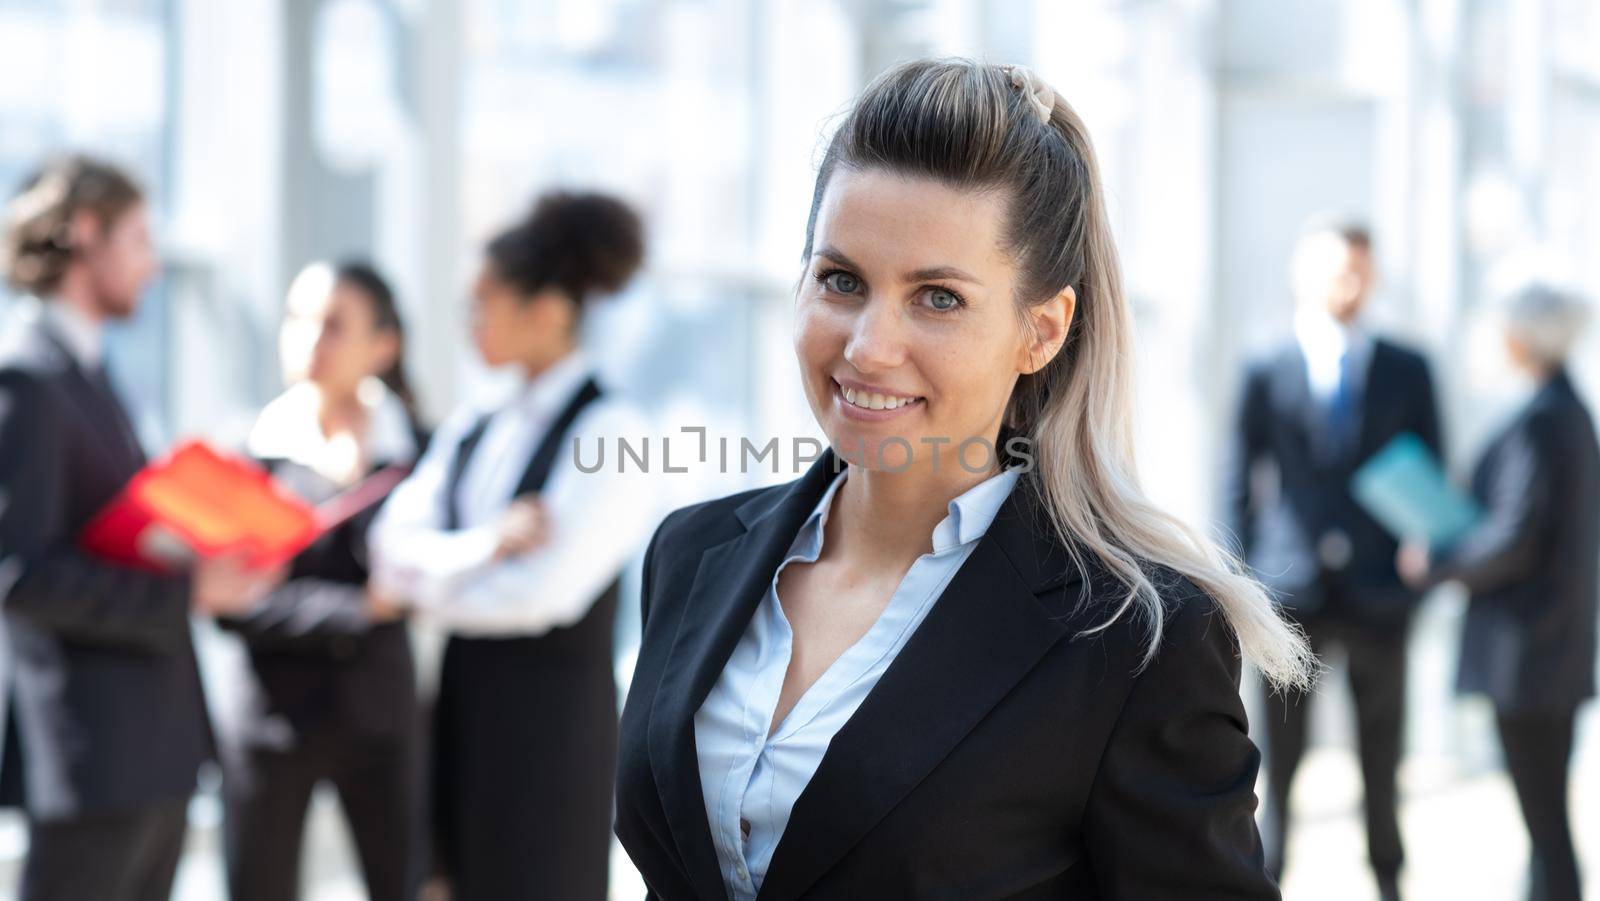 Beautiful young business woman in formal suit standing in front of colleagues in business building